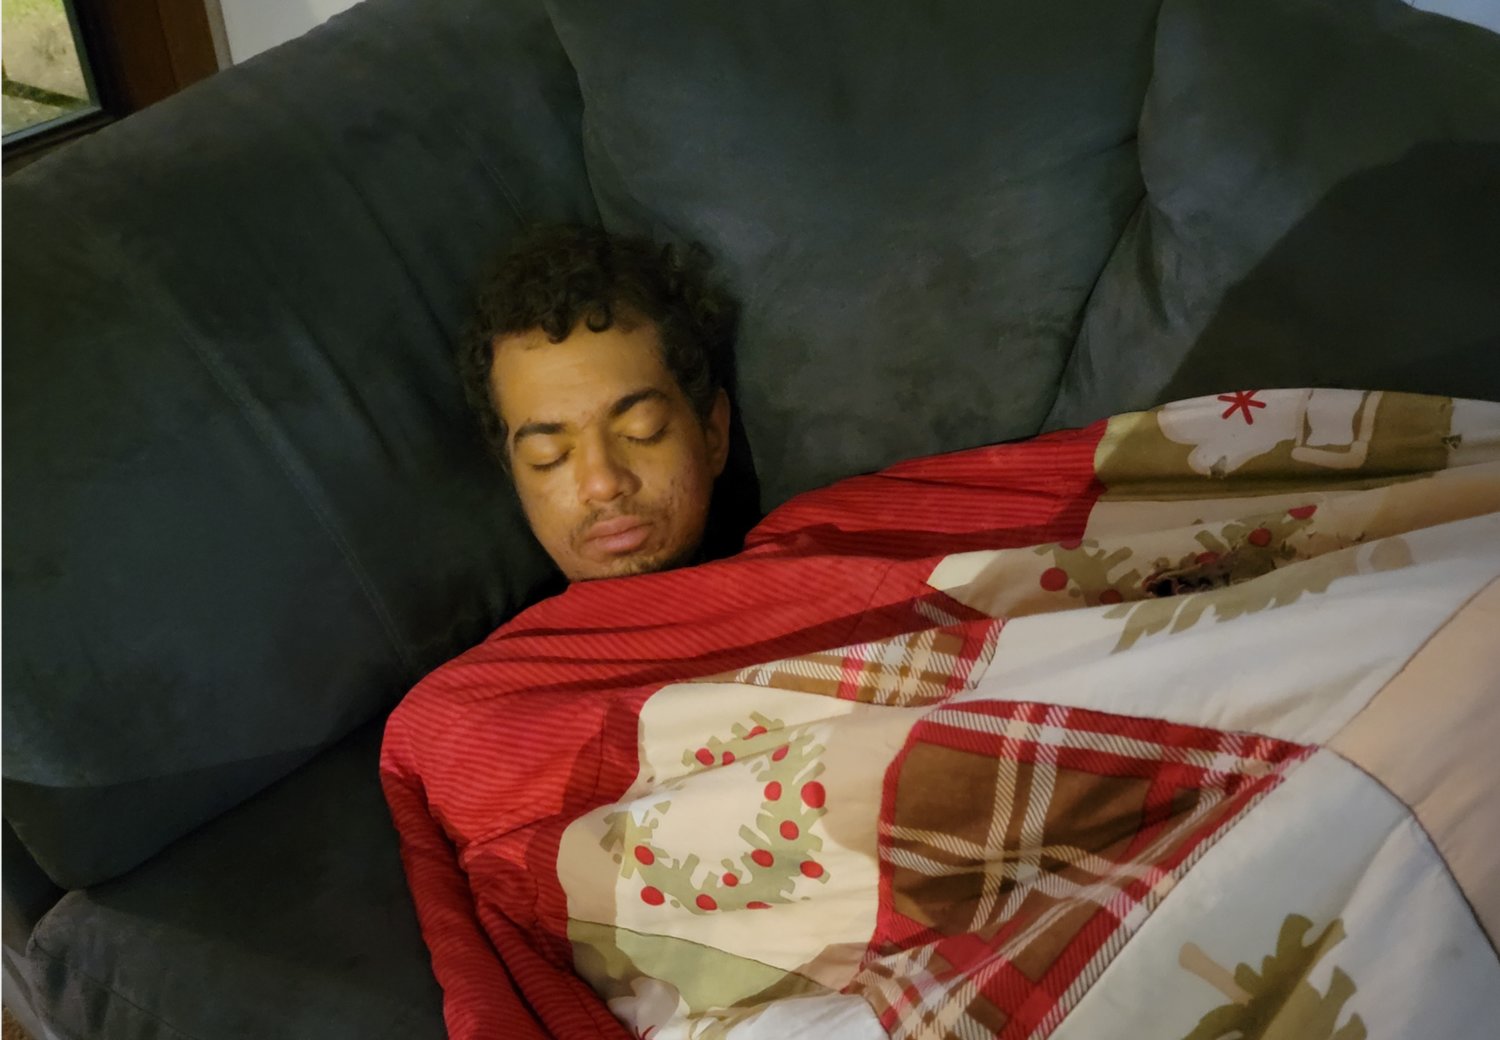 Marquise Reynolds, 21, of Onalaska, has been living with liver disease for six years now and is currently awaiting a third liver transplant. His mother, Dawn, said the disease often makes him so weak that he spends most days just sleeping on the couch.